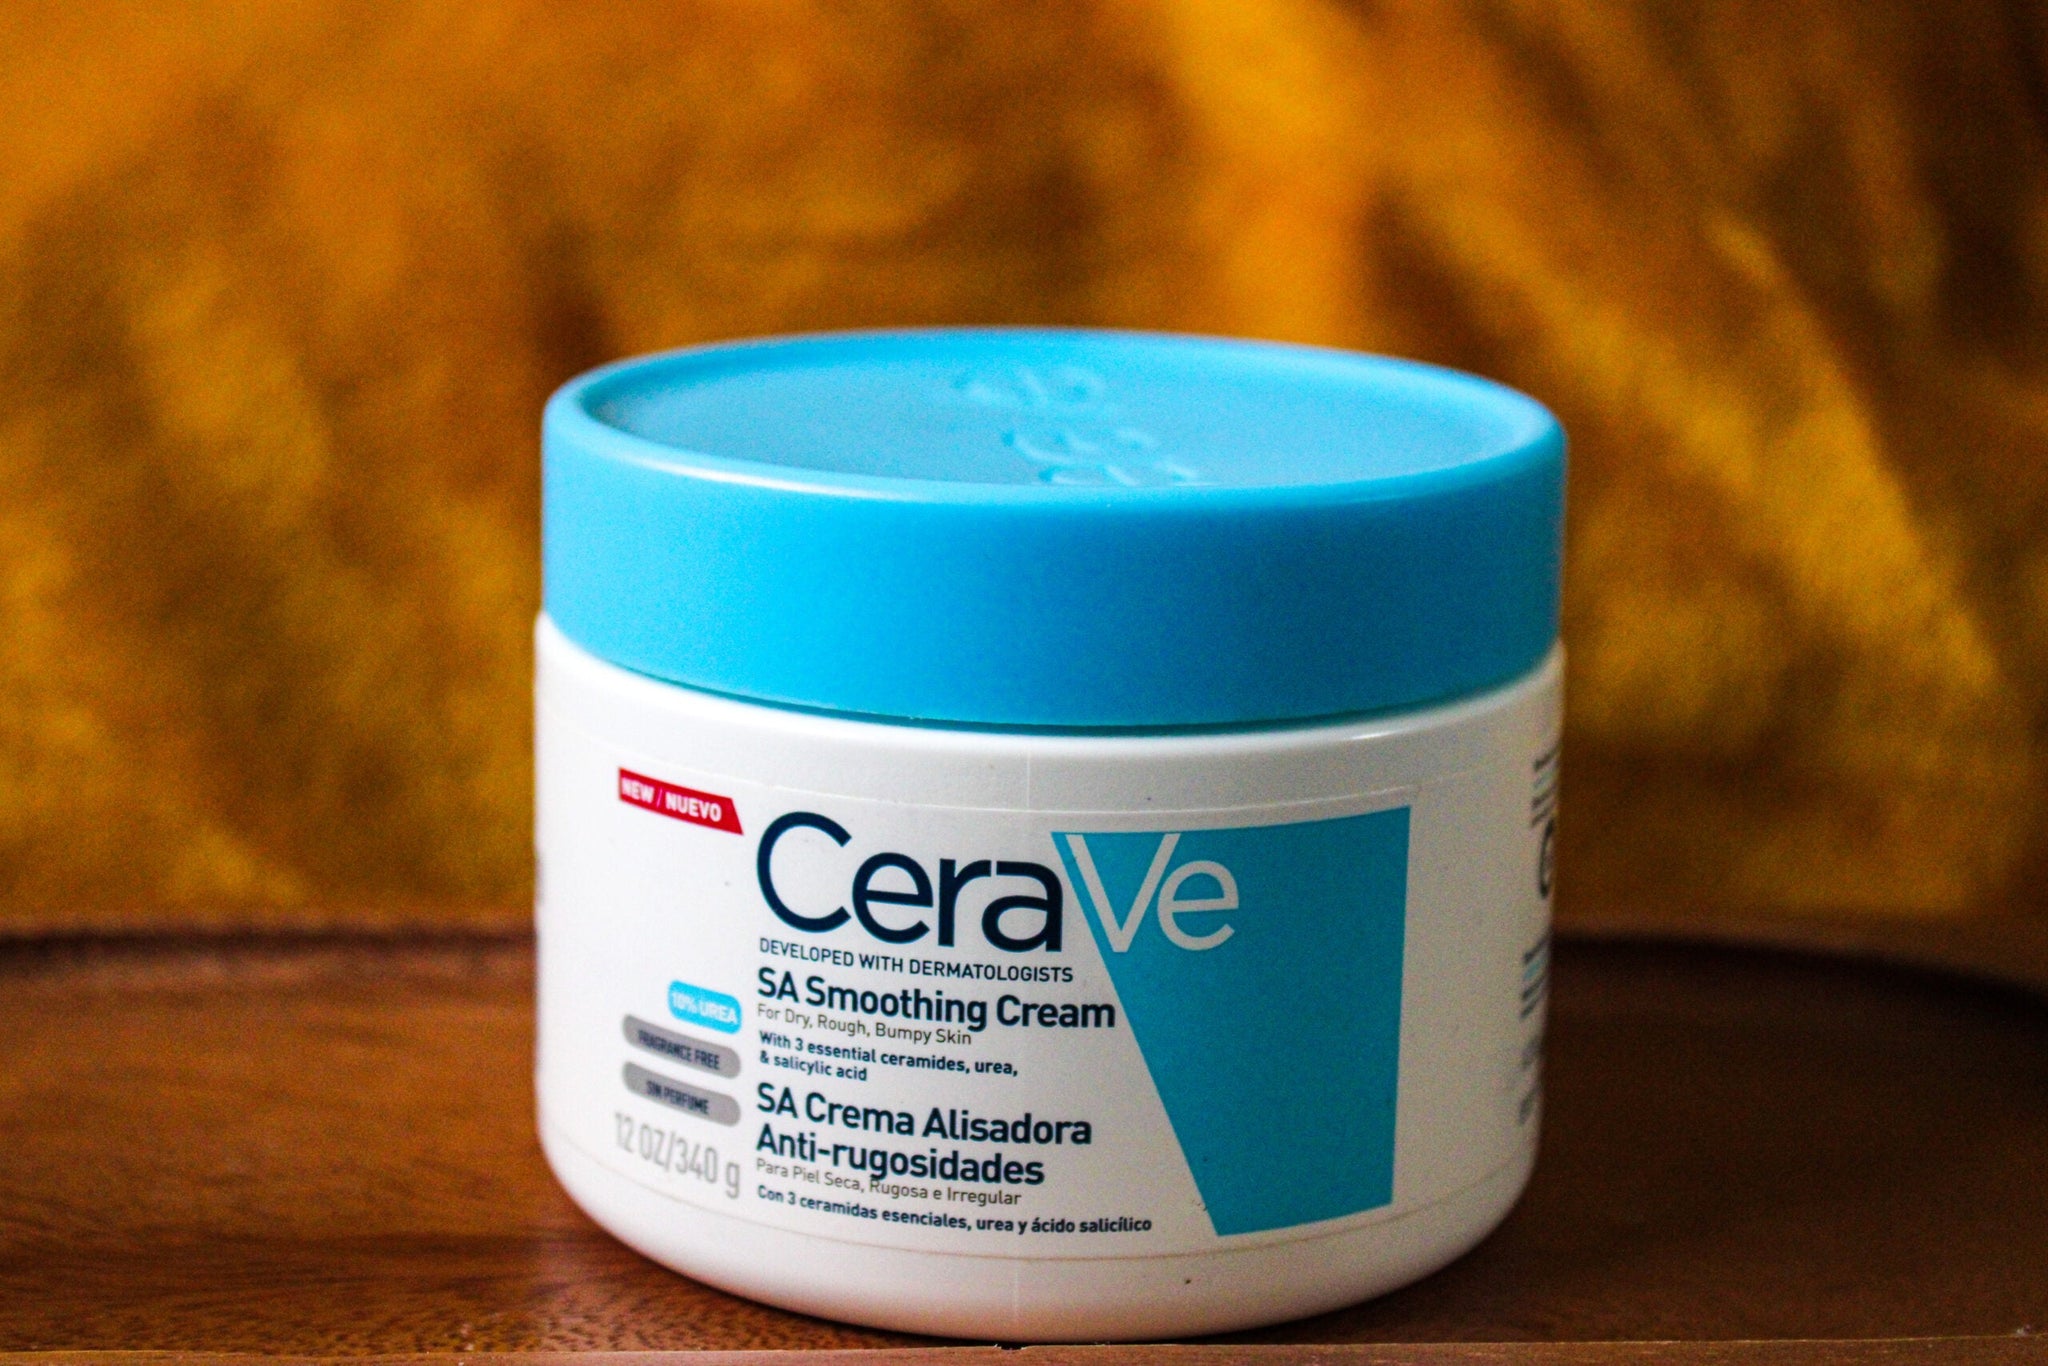 CeraVe
SA Smoothing Cream For Dry, Rough, Bumpy Skin